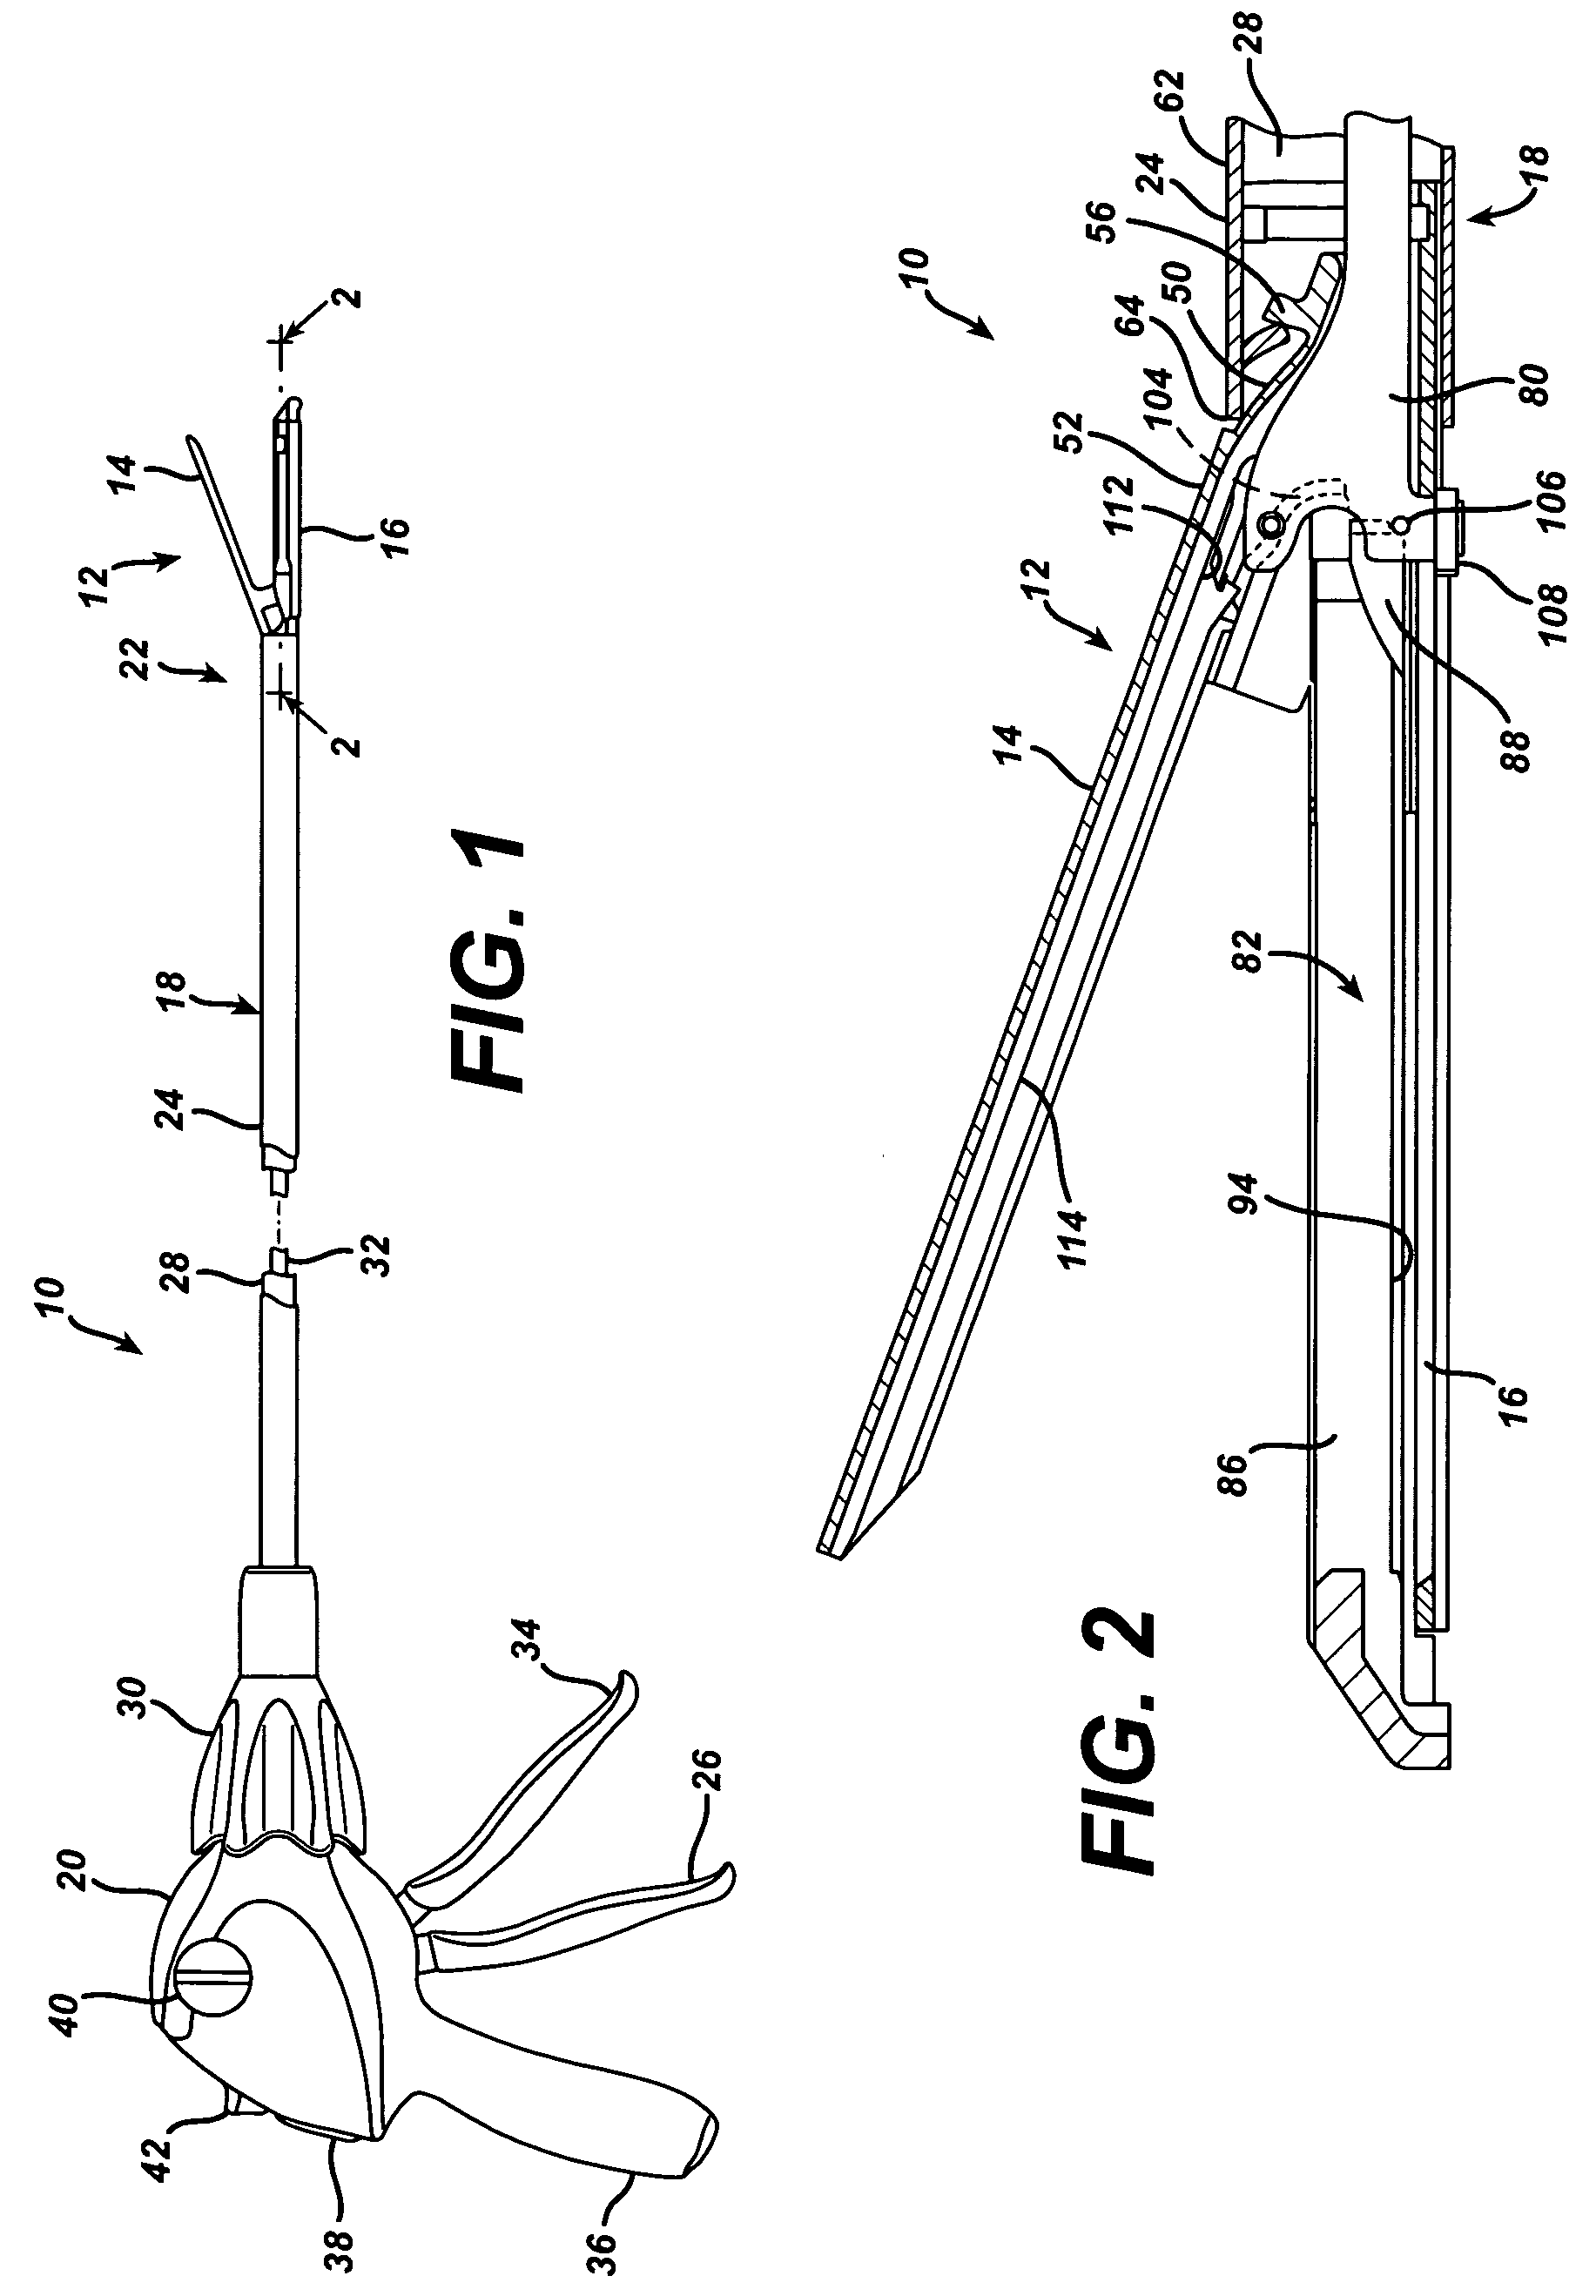 Surgical stapling instrument having multistroke firing with opening lockout